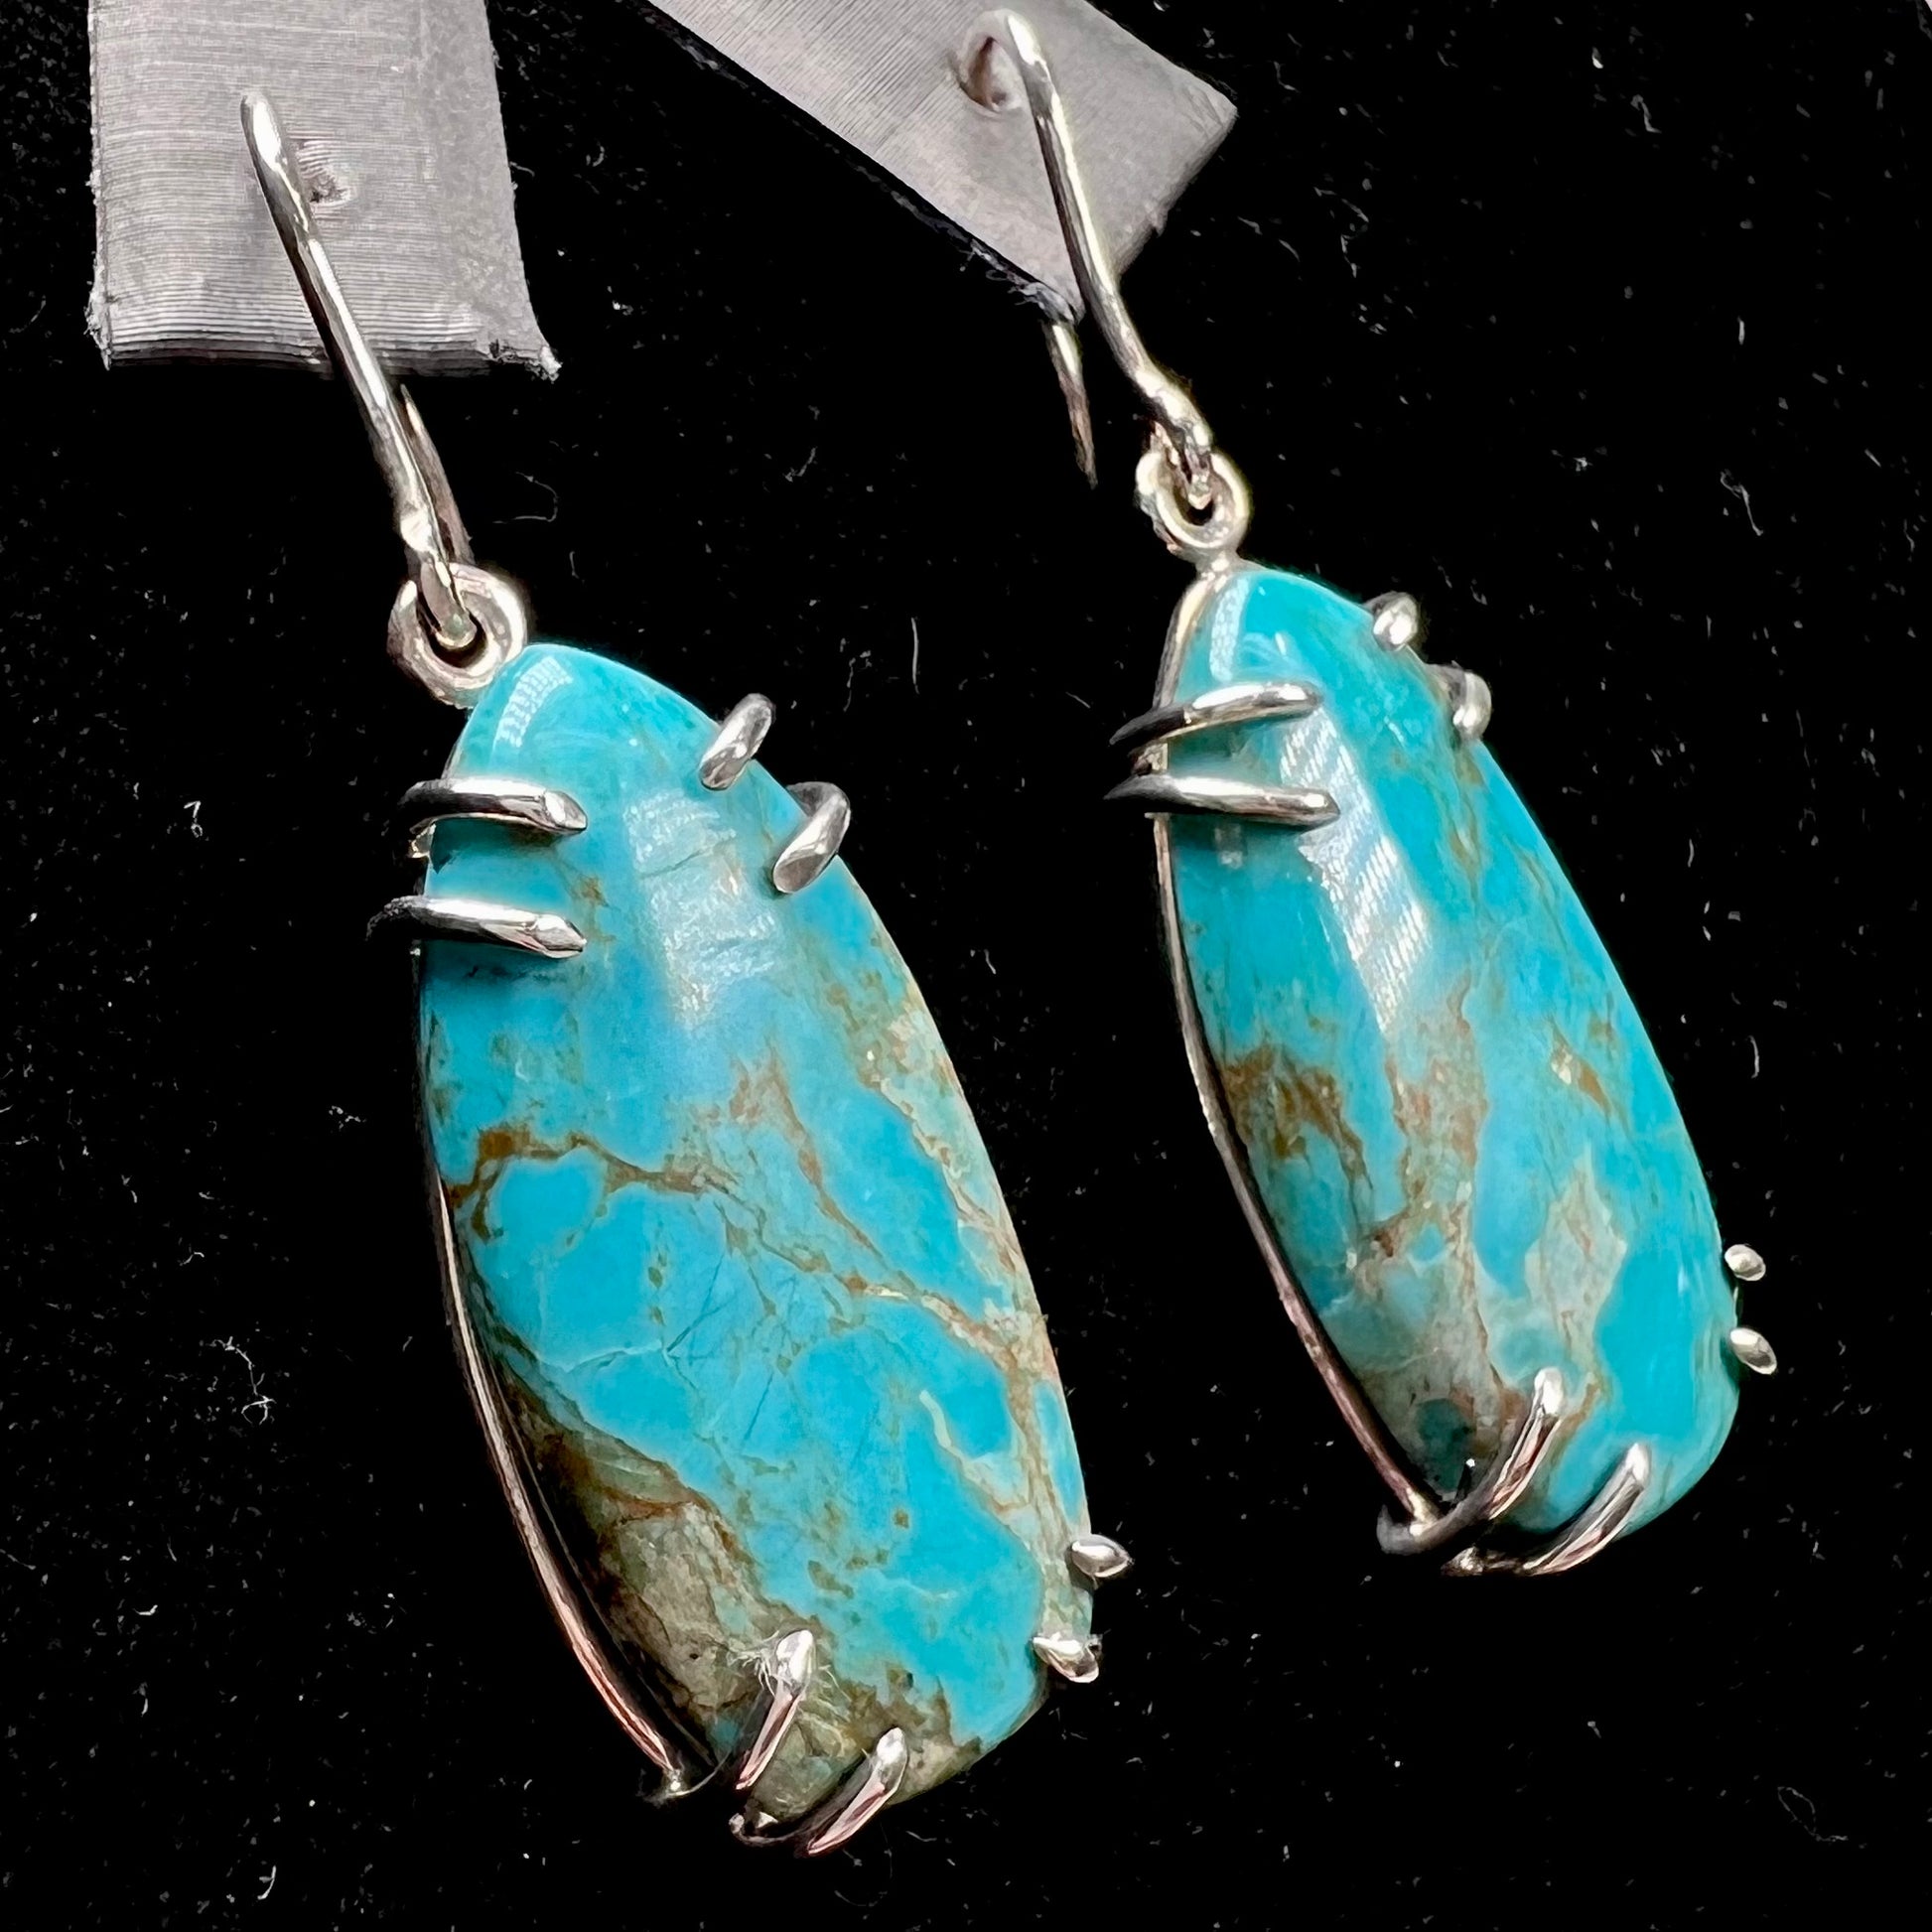 Sterling silver French wire earrings double prong set with cabochon cut turquoise from Pilot Mountain Mine.